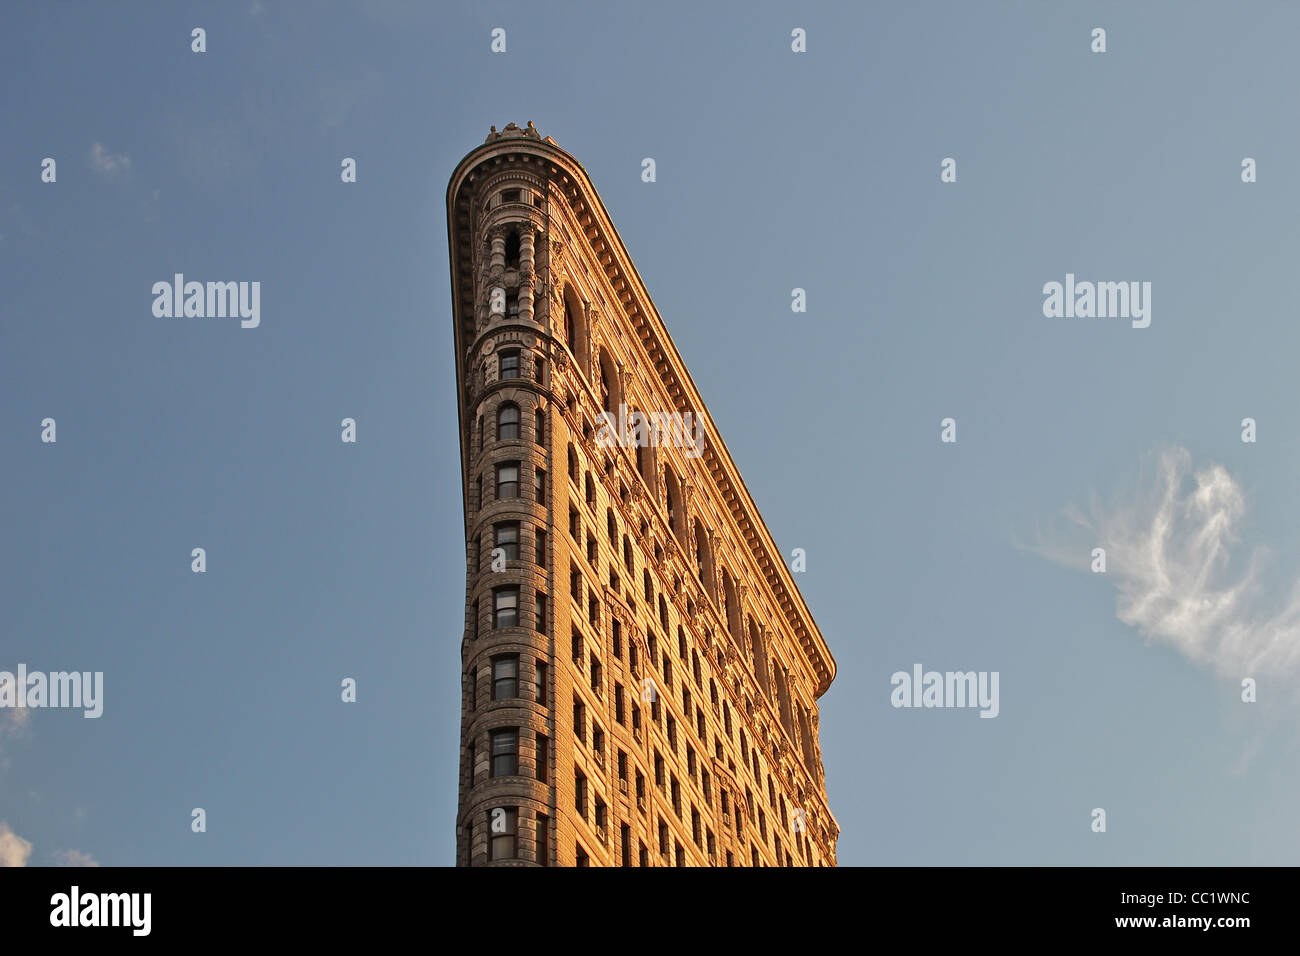 The Flatiron Building (built in 1902) in the late afternoon sunlight, Manhattan, New York City Stock Photo